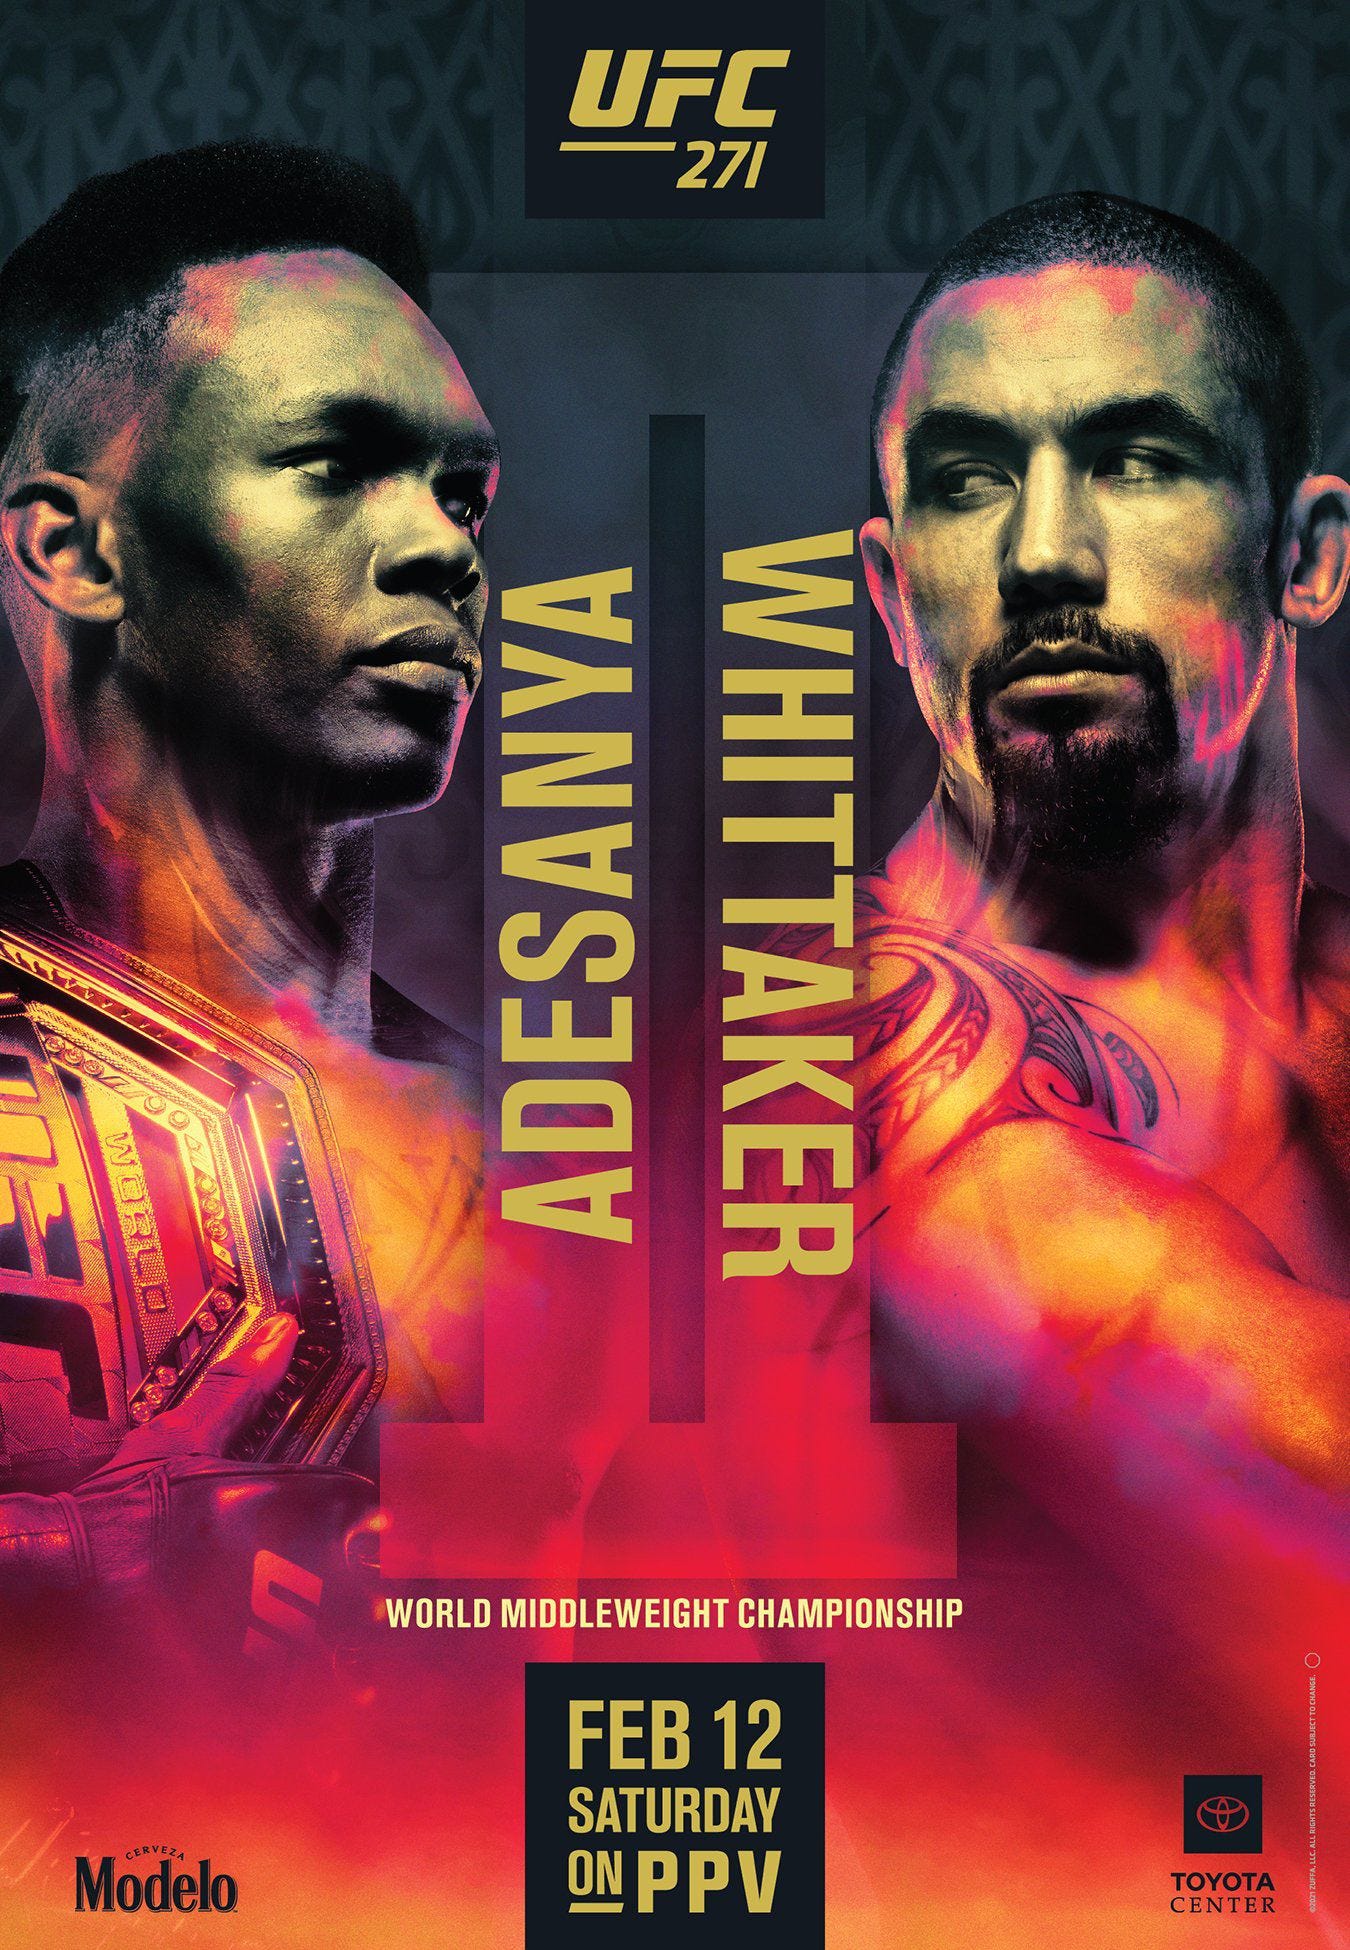 Pic: UFC 271 poster drops for 'Adesanya vs Whittaker 2' on Feb. 12 in  Houston - MMAmania.com